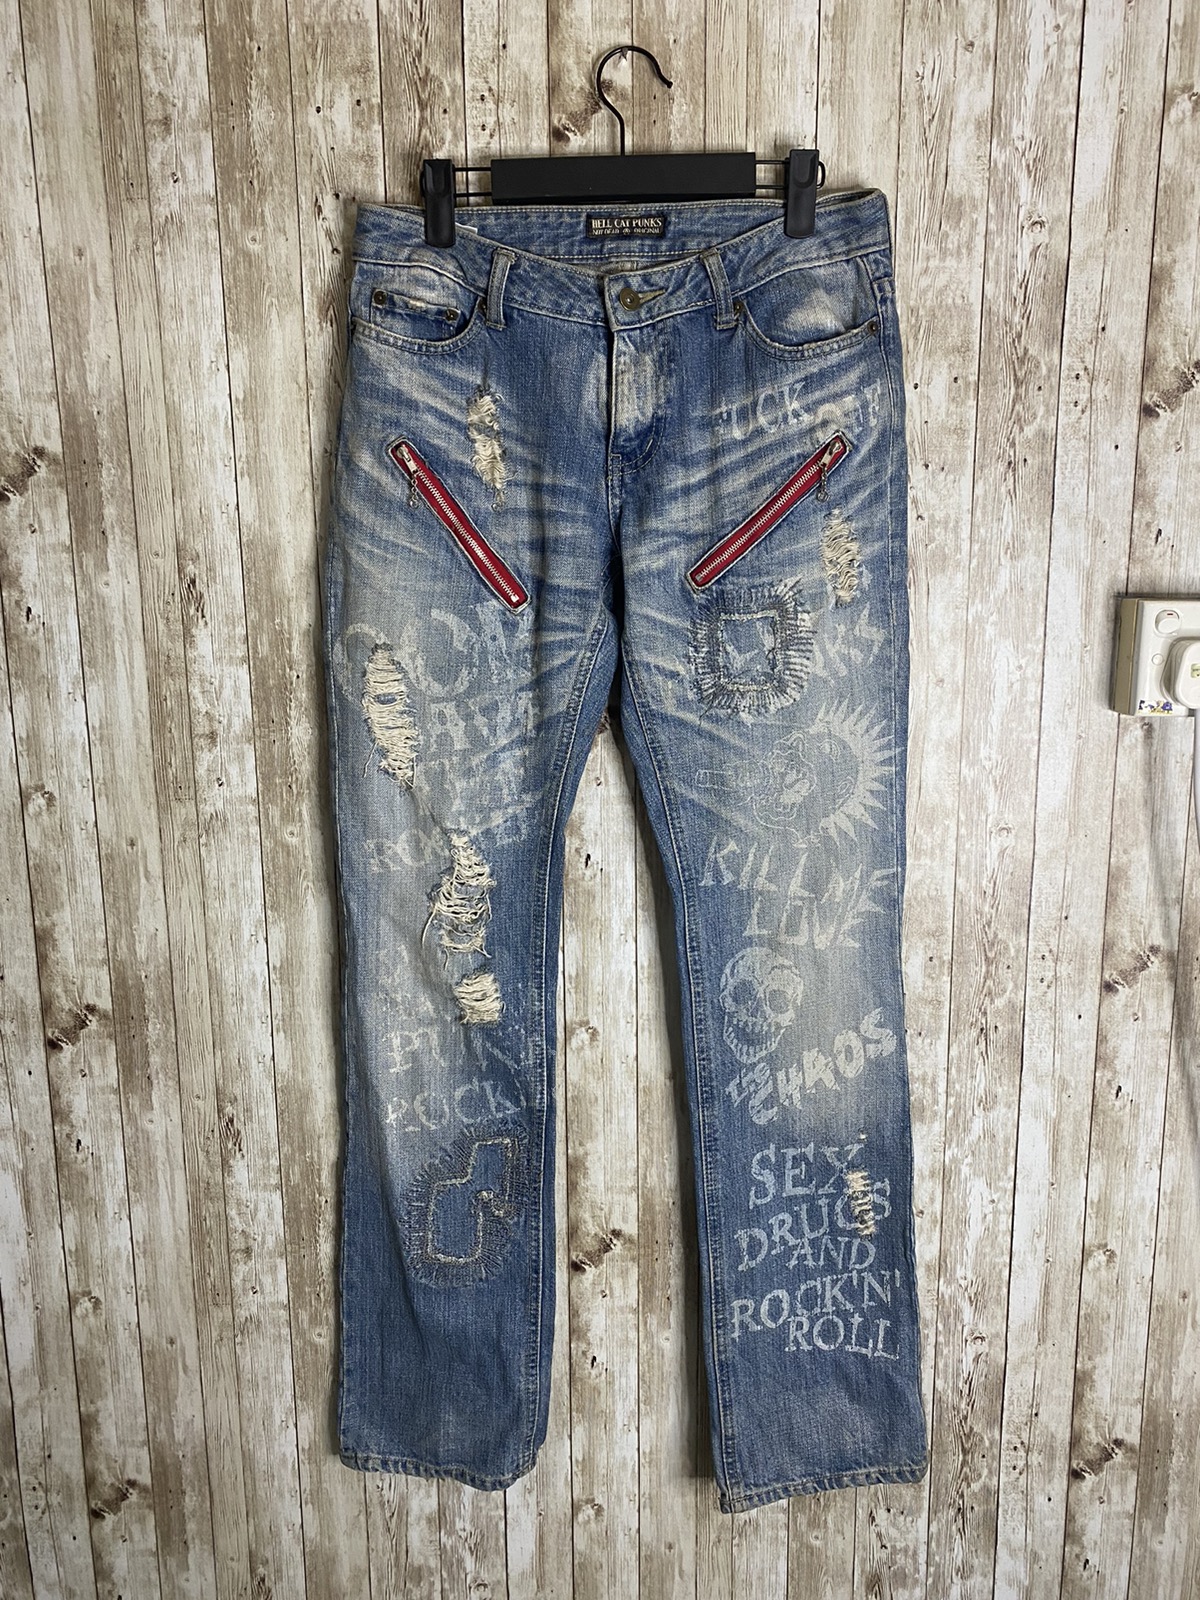 Japanese Brand - Seditionaries Hell Cat Punks Jeans - 1